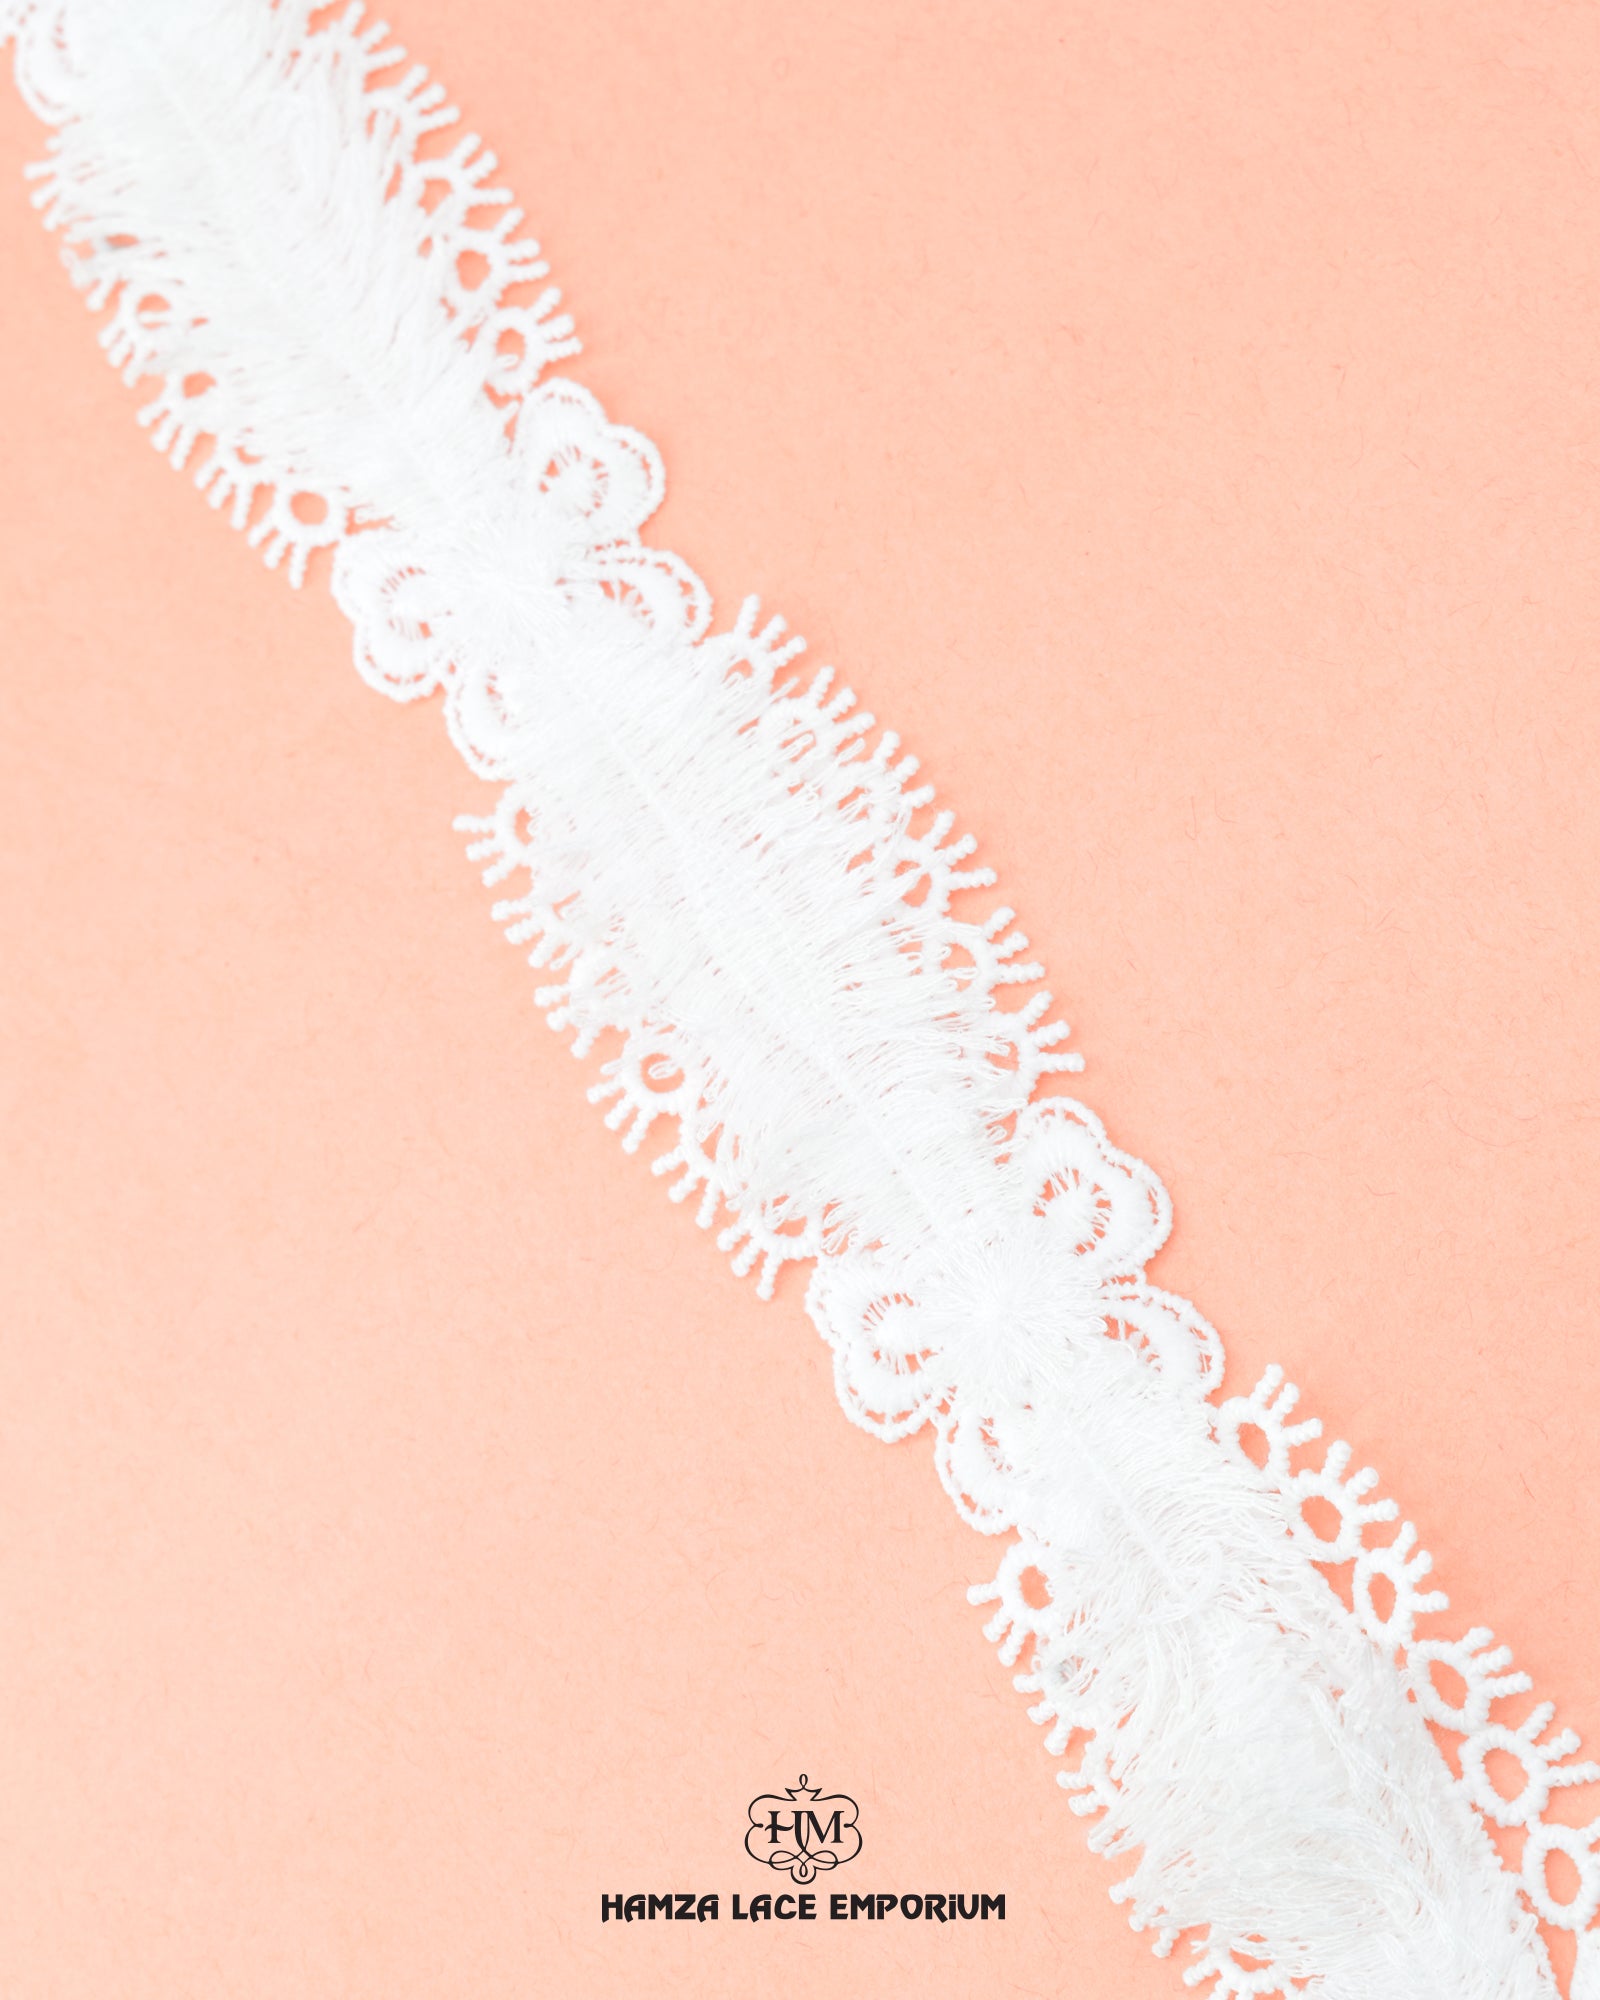 'Center Filling Lace 23058' with the sign 'Hamza Lace' at the bottom